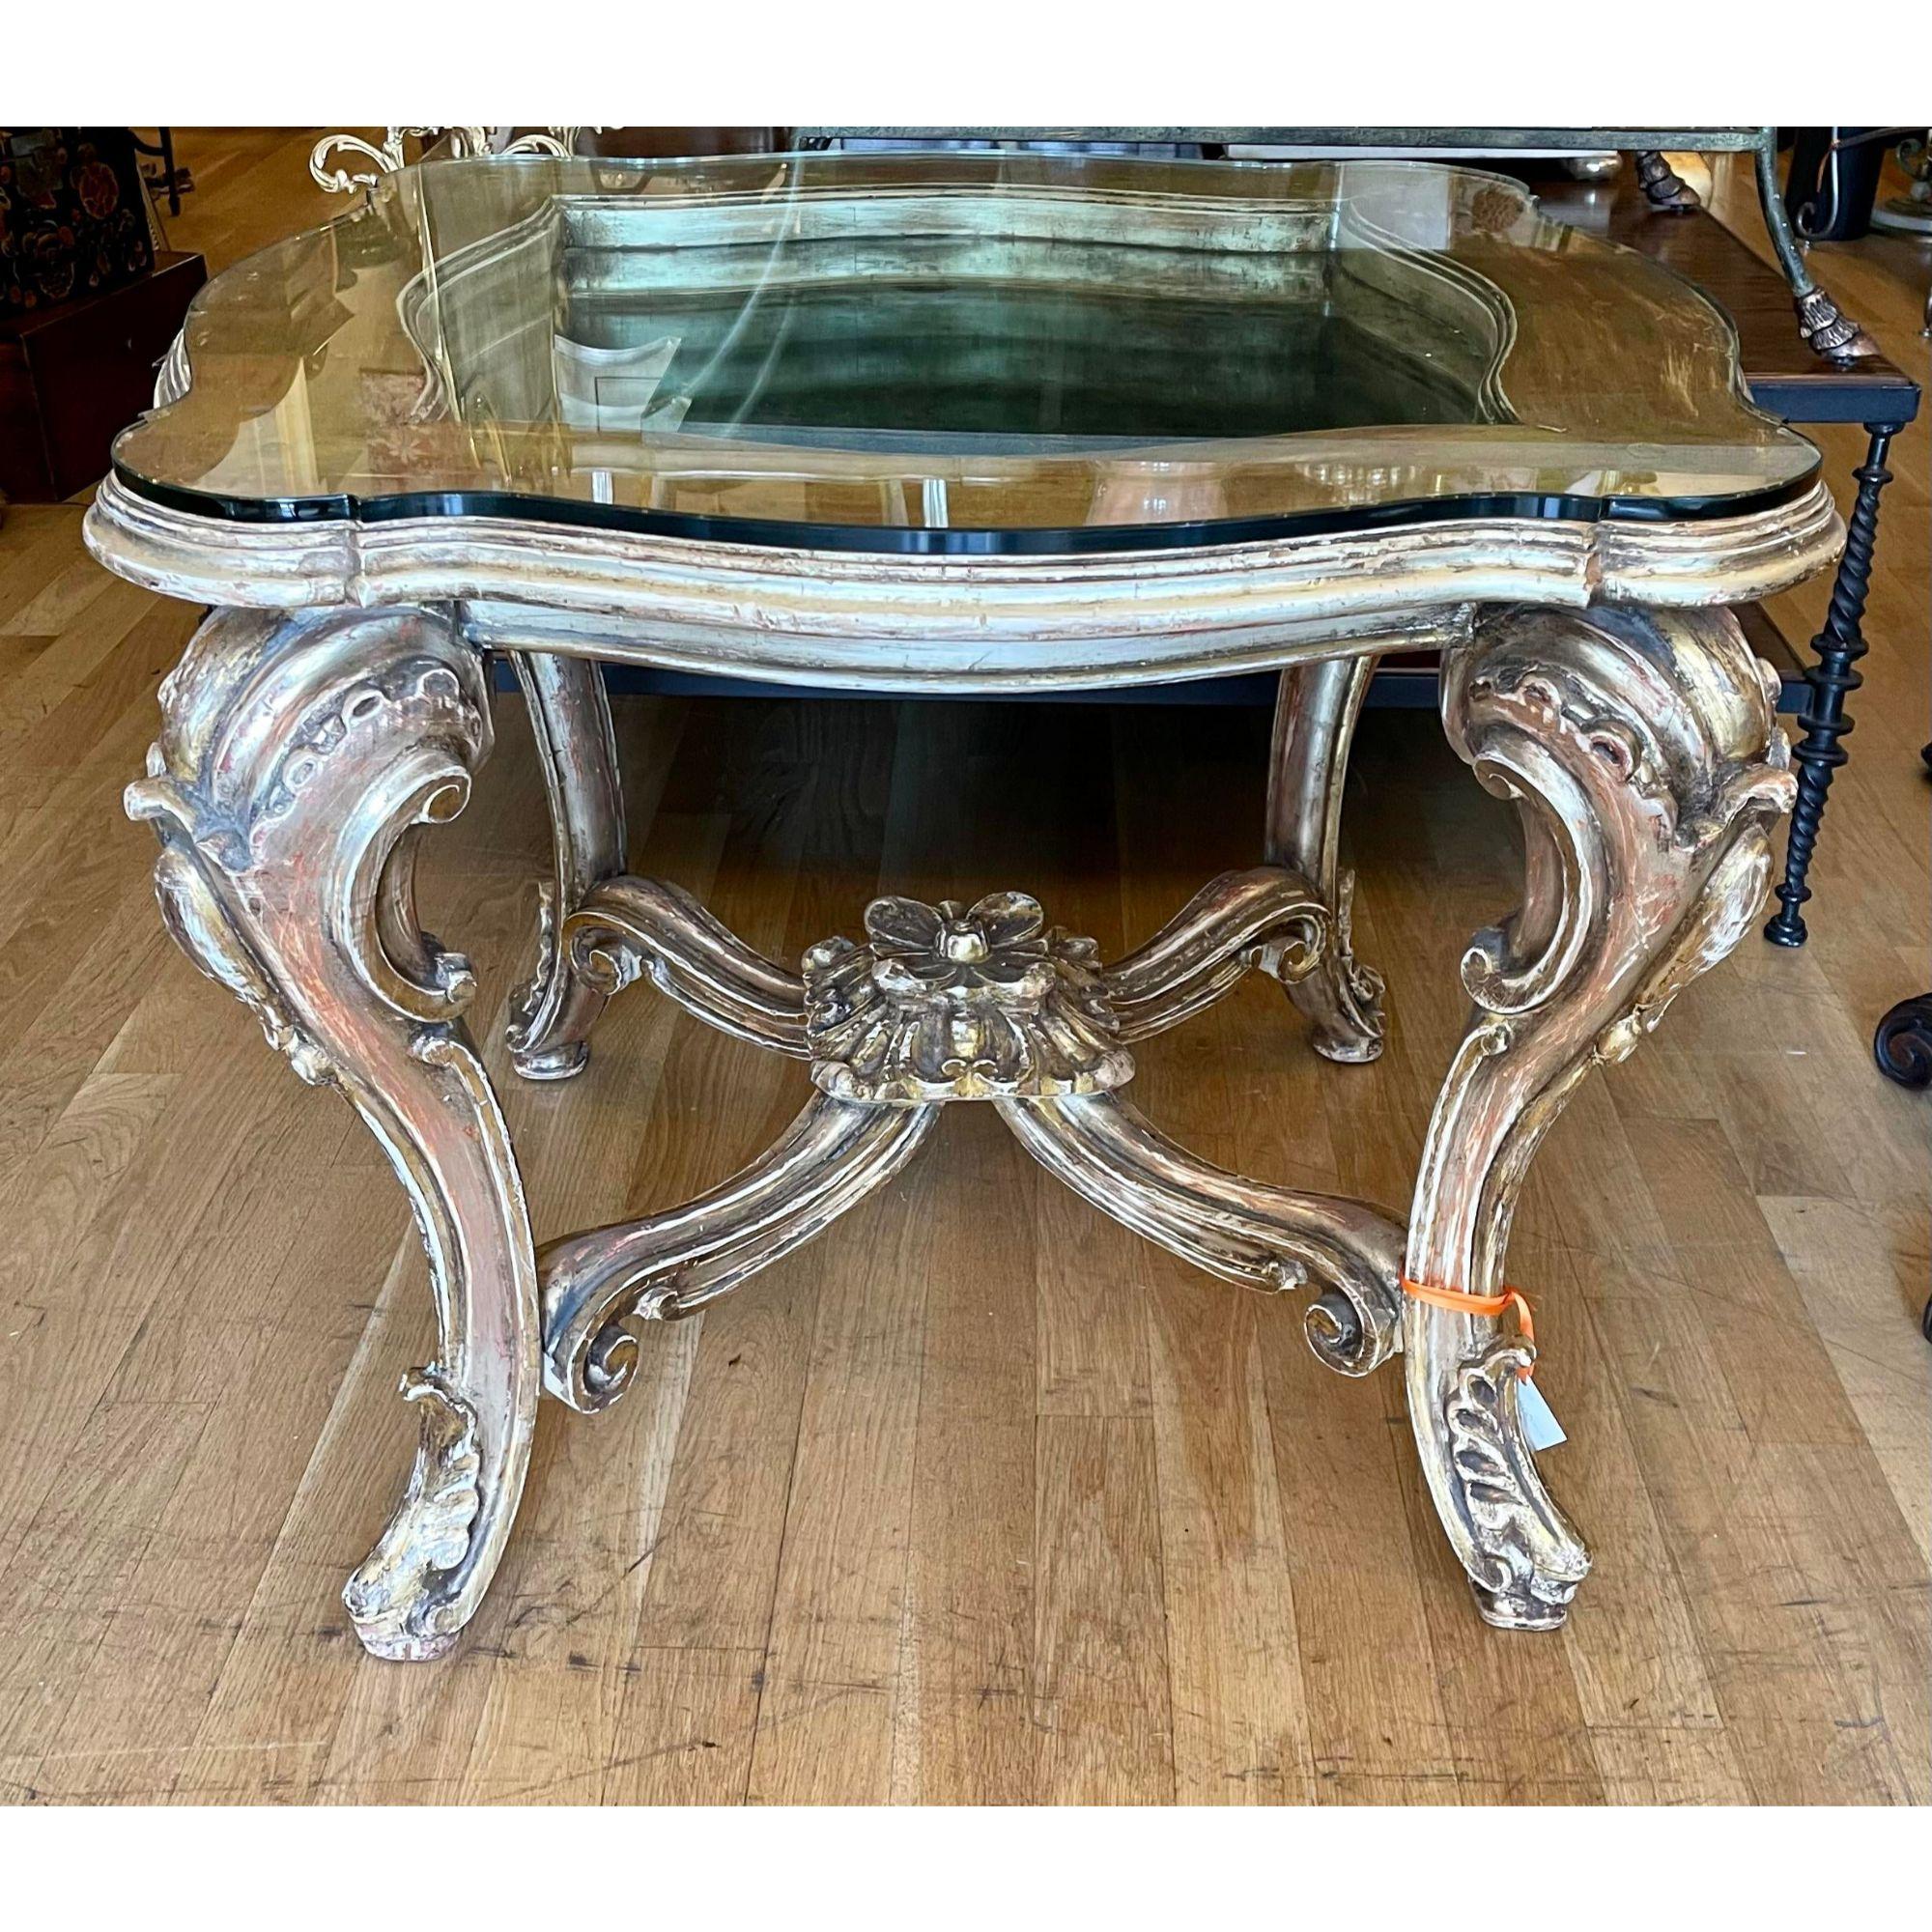 20th Century Antique 18th Century Style Rococo Venetian Giltwood Table by W Antiqued Mirror For Sale